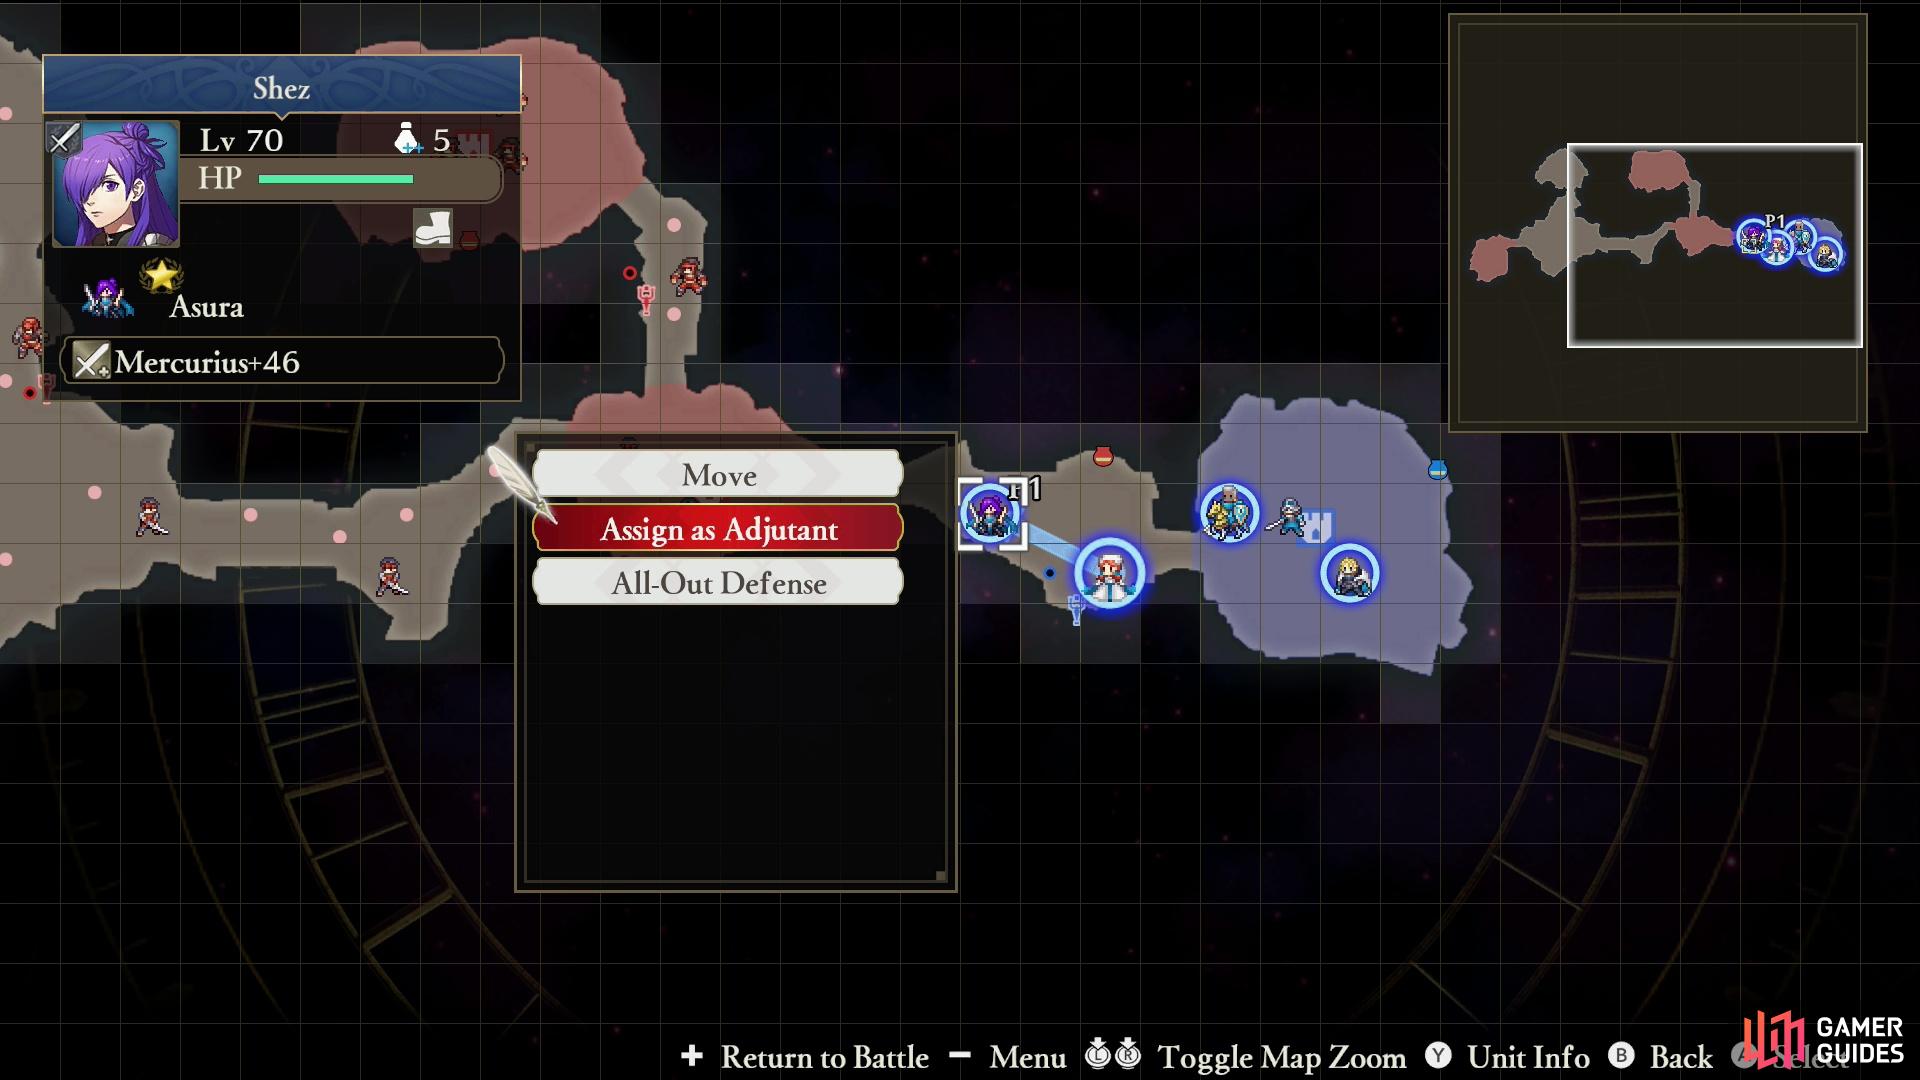 or you can assign Adjutants via the battle map.